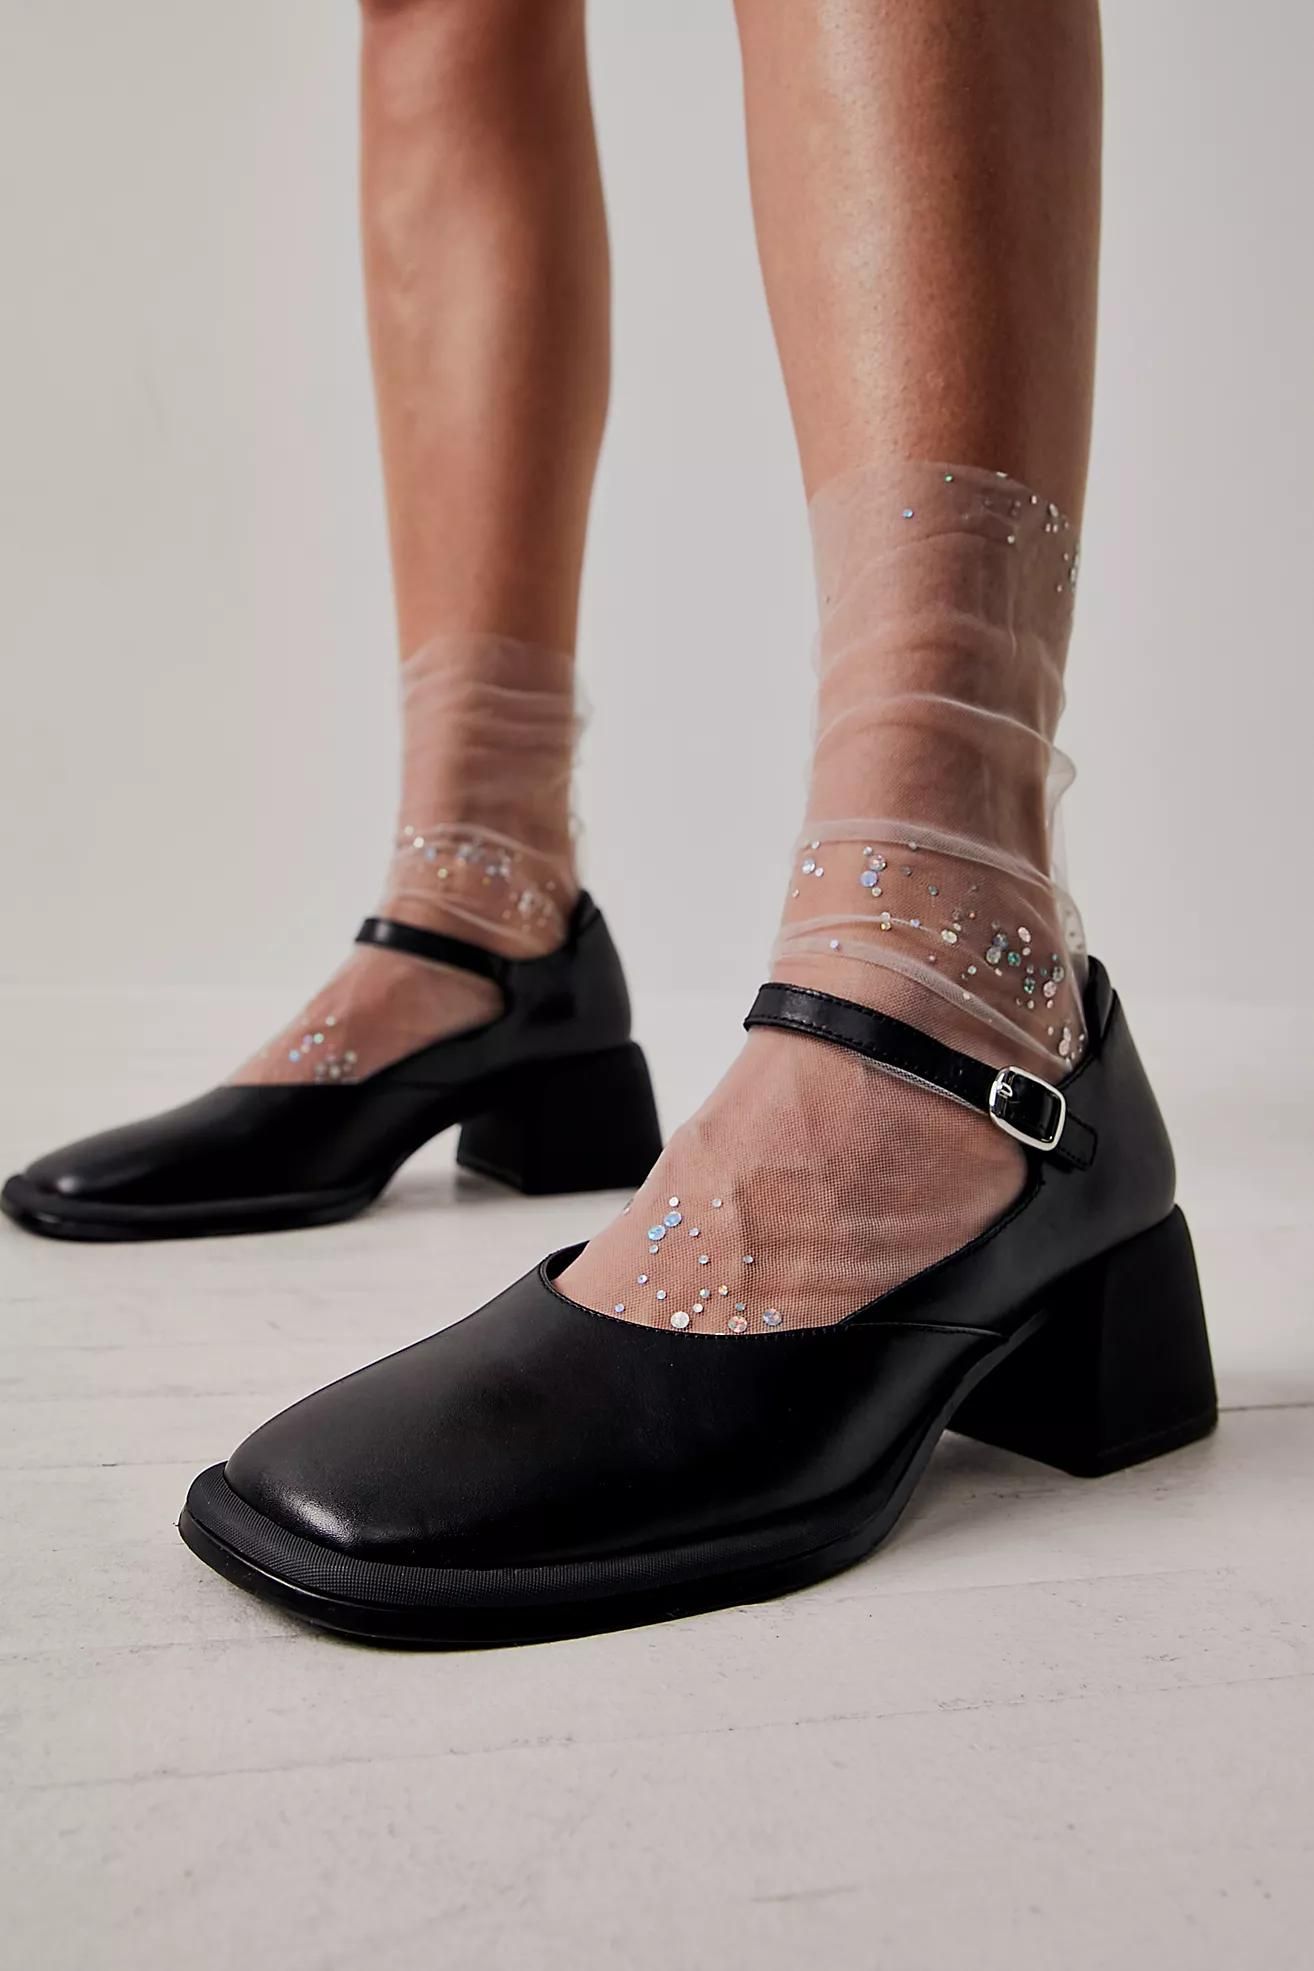 DR. COMFORT COCO DRESS HEELS – The Medical Zone